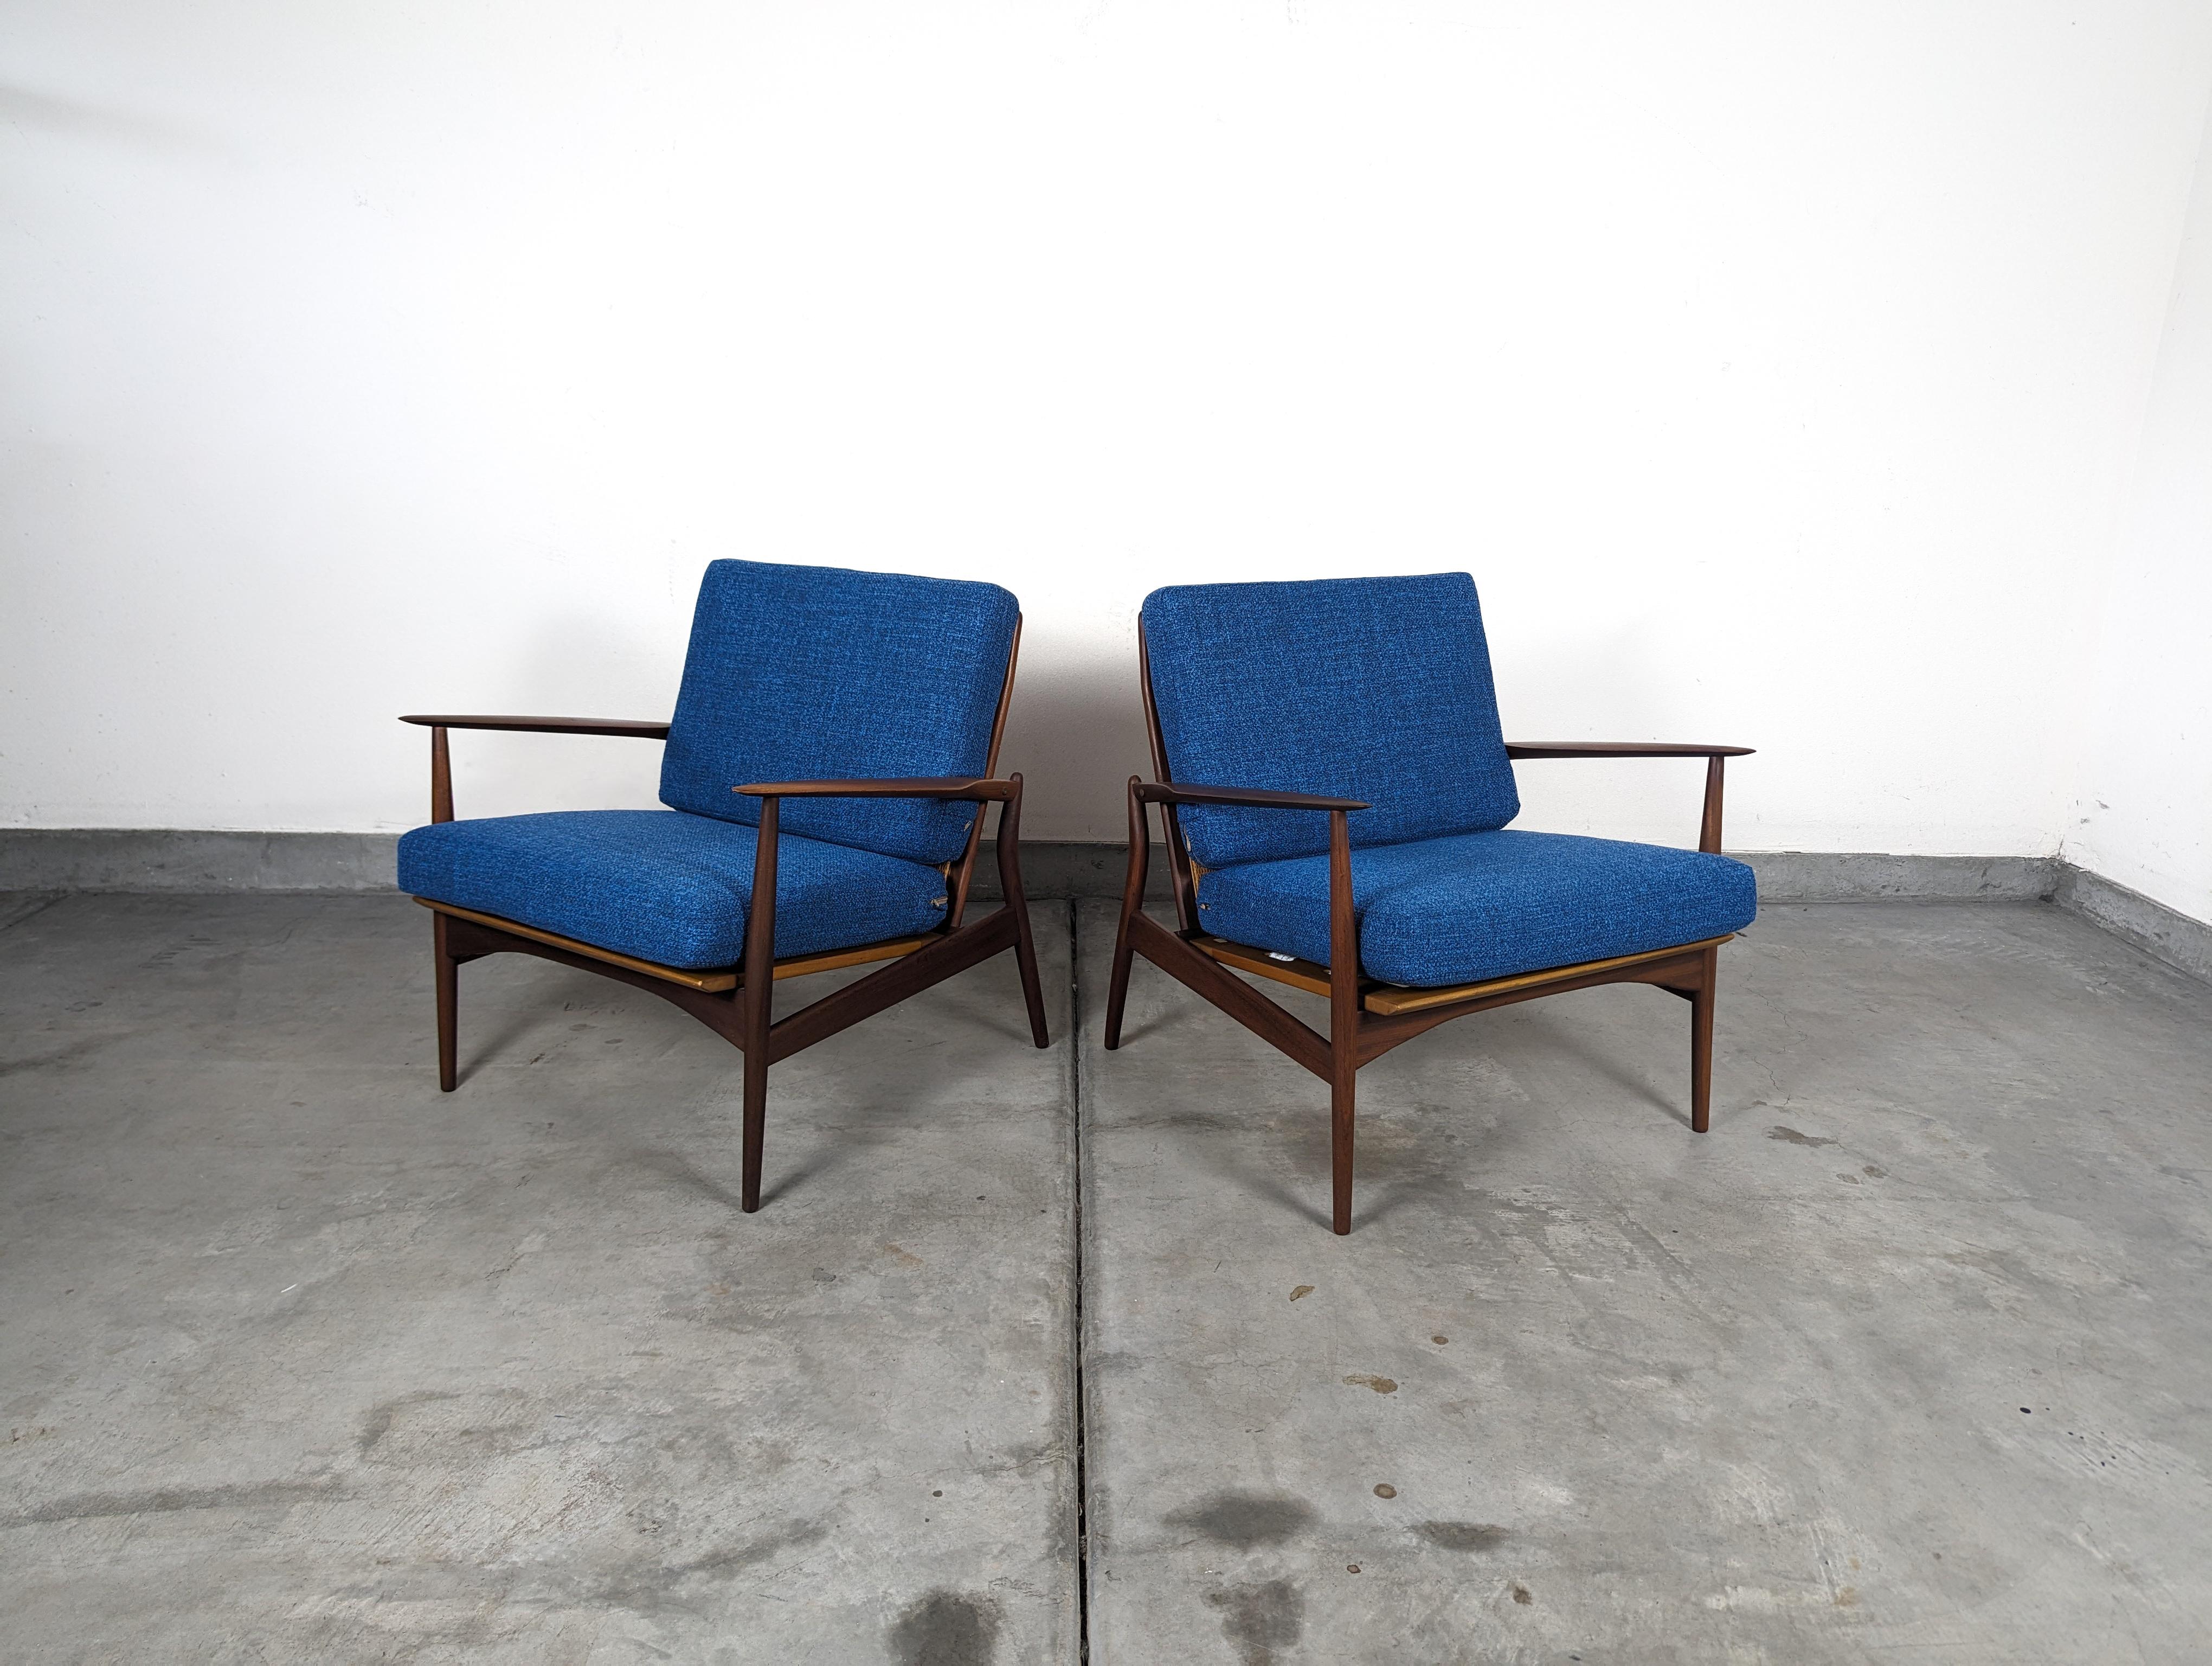 Discover the epitome of mid-century charm with this stunning pair of lounge chairs by the acclaimed Danish designer Ib Kofod Larsen, designed for the esteemed Selig brand in the 1960s. These spear chairs encapsulate the essence of the era, offering